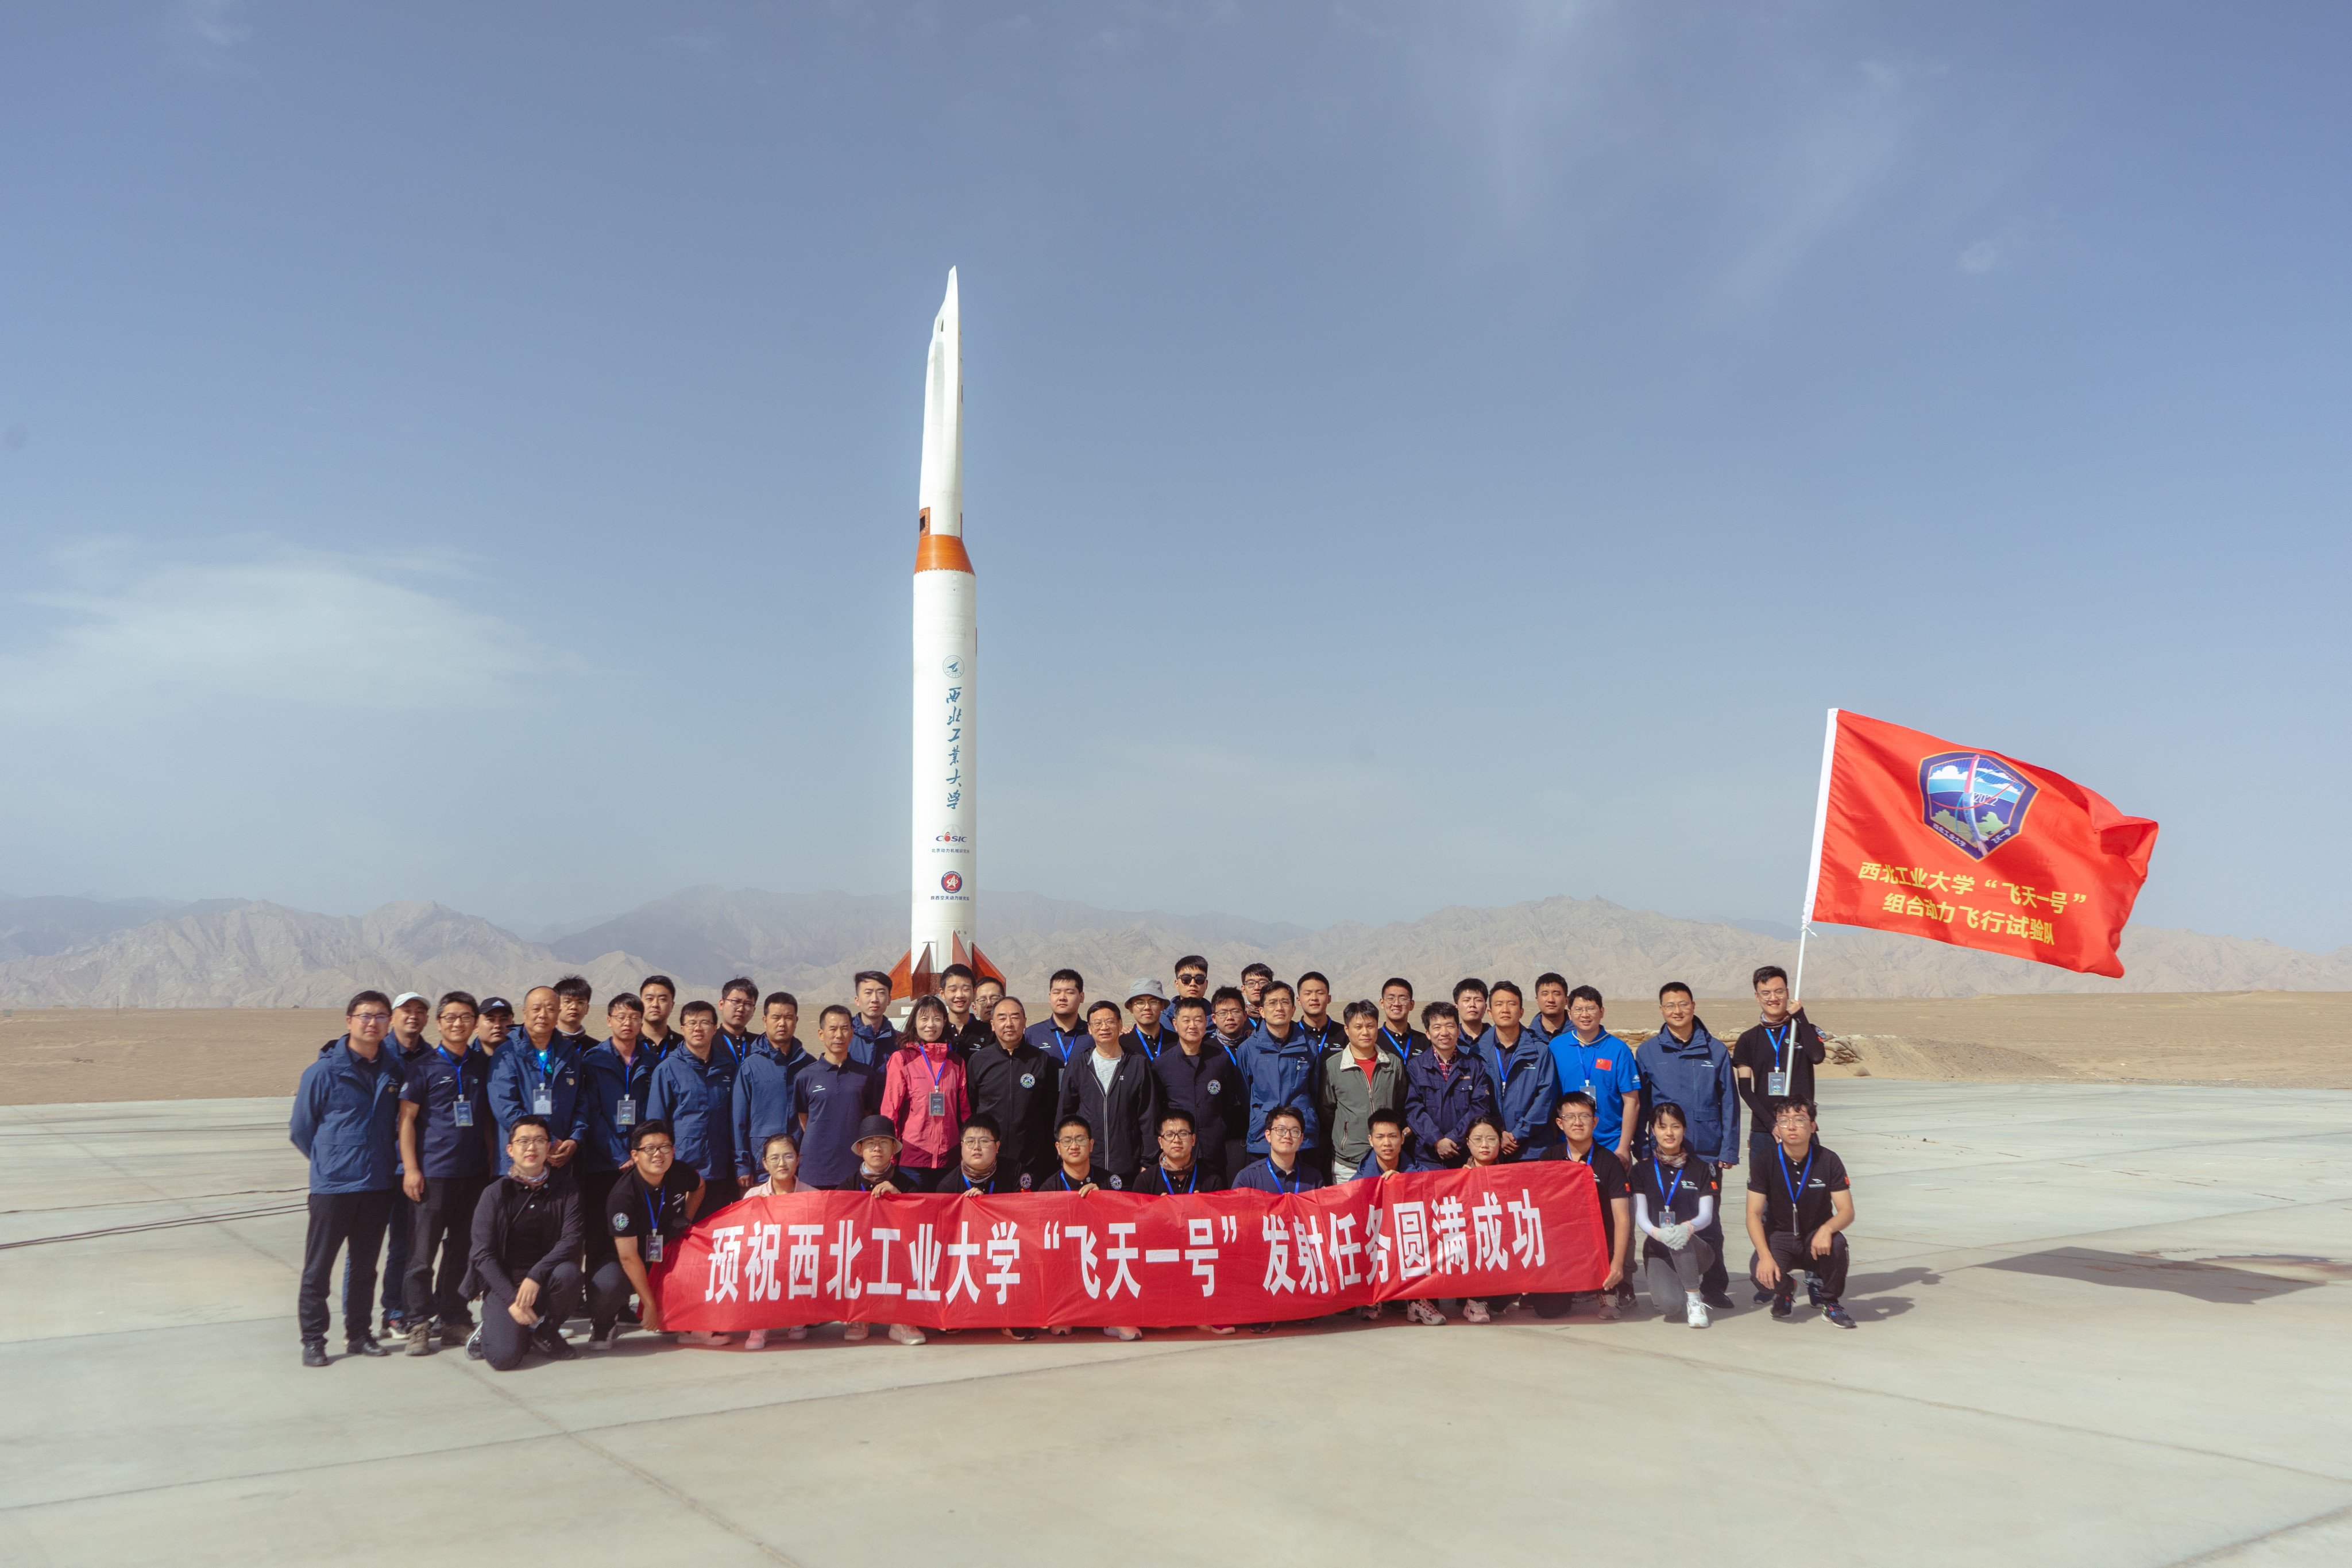 China’s new missile design appears to be based on the Feitian-1 hypersonic vehicle, pictured ahead of its successful test launch in 2022. Photo: Northwestern Polytechnical University